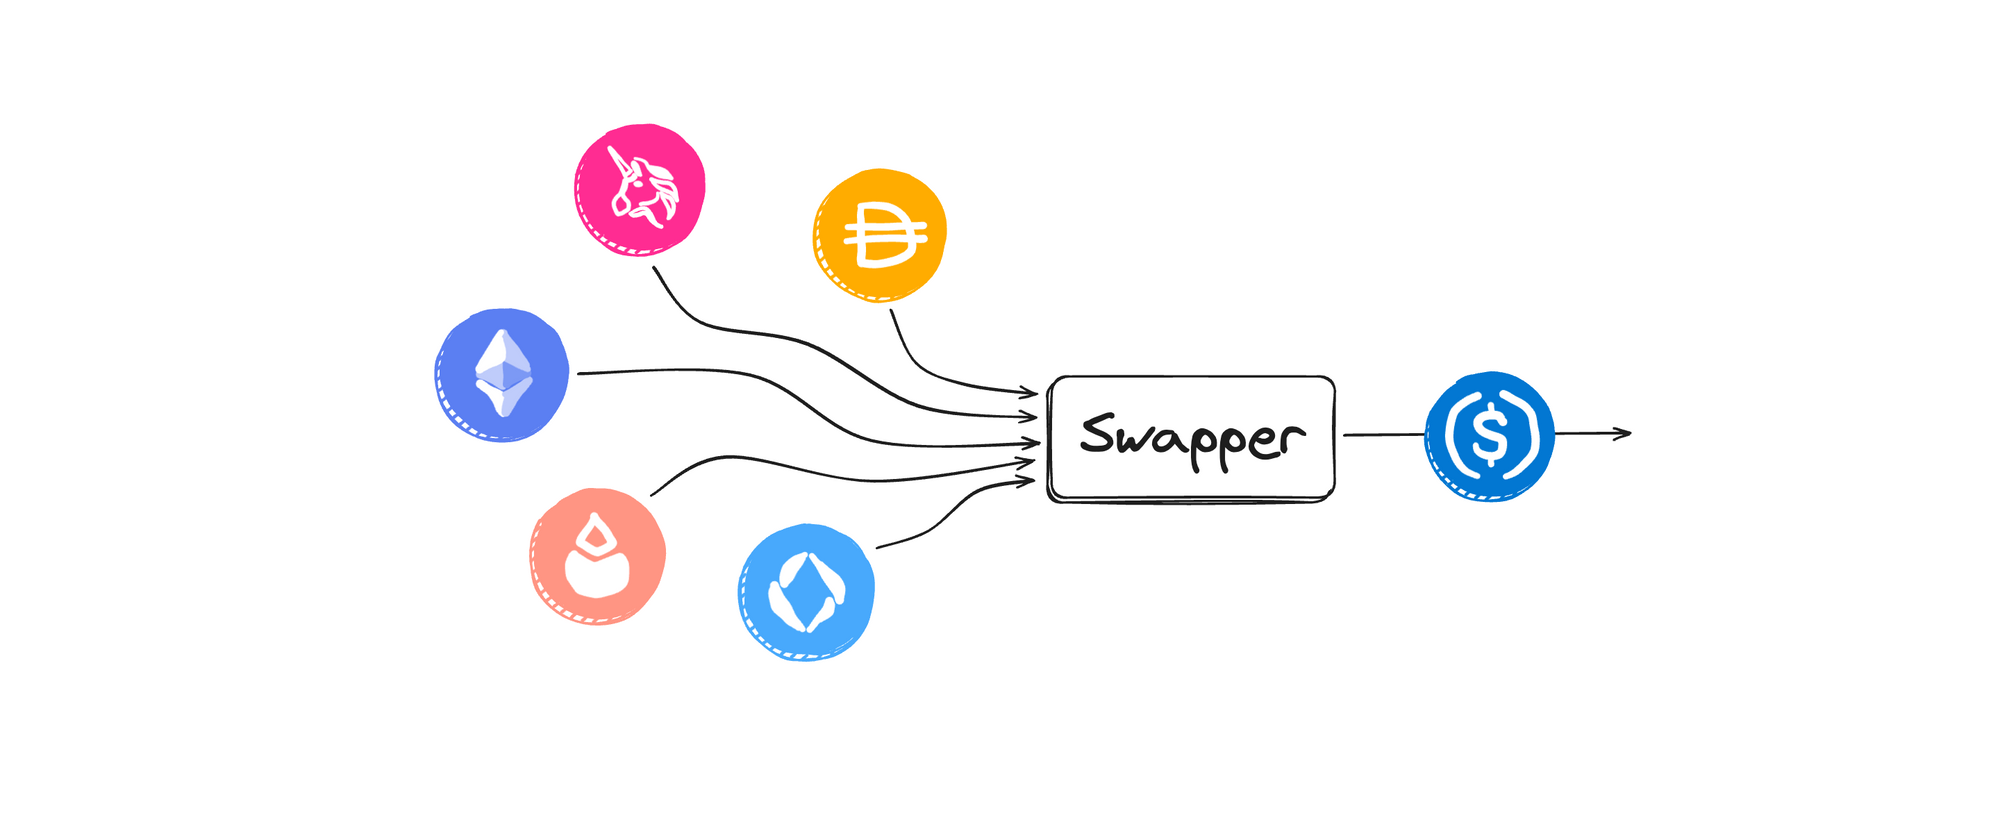 Introducing Swapper